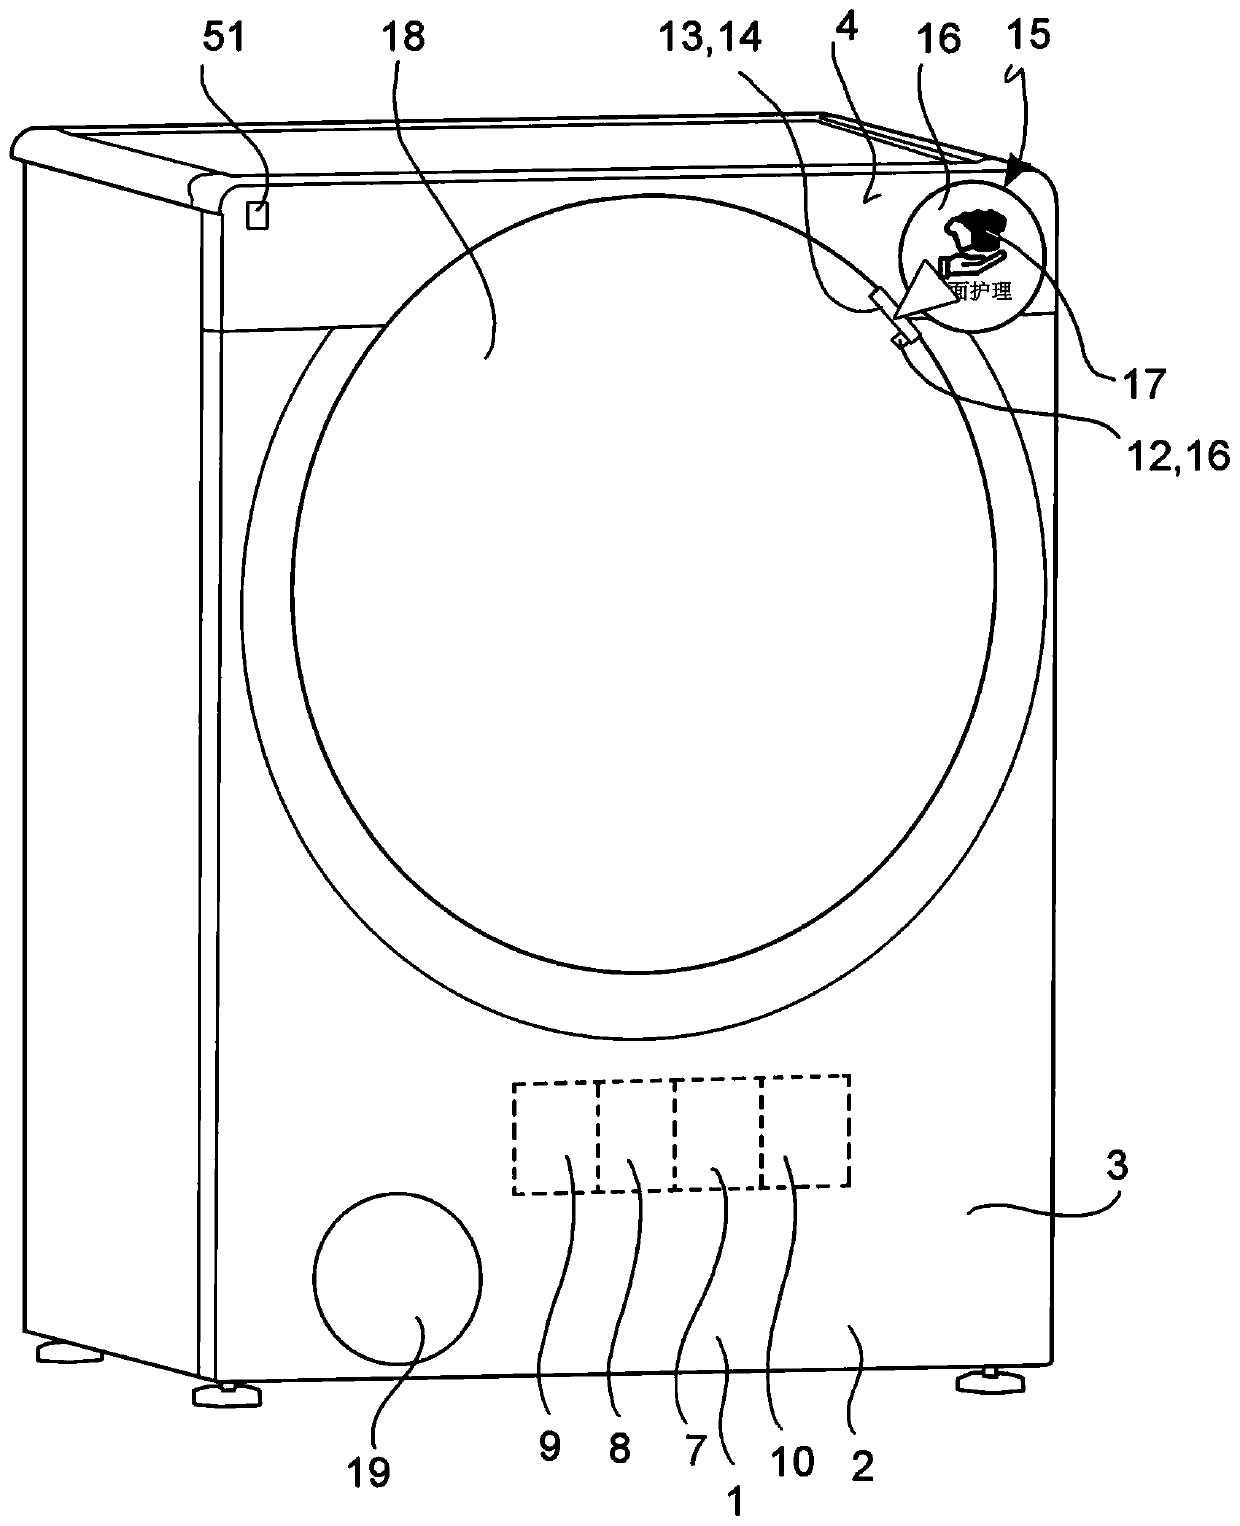 Household appliance with user interface